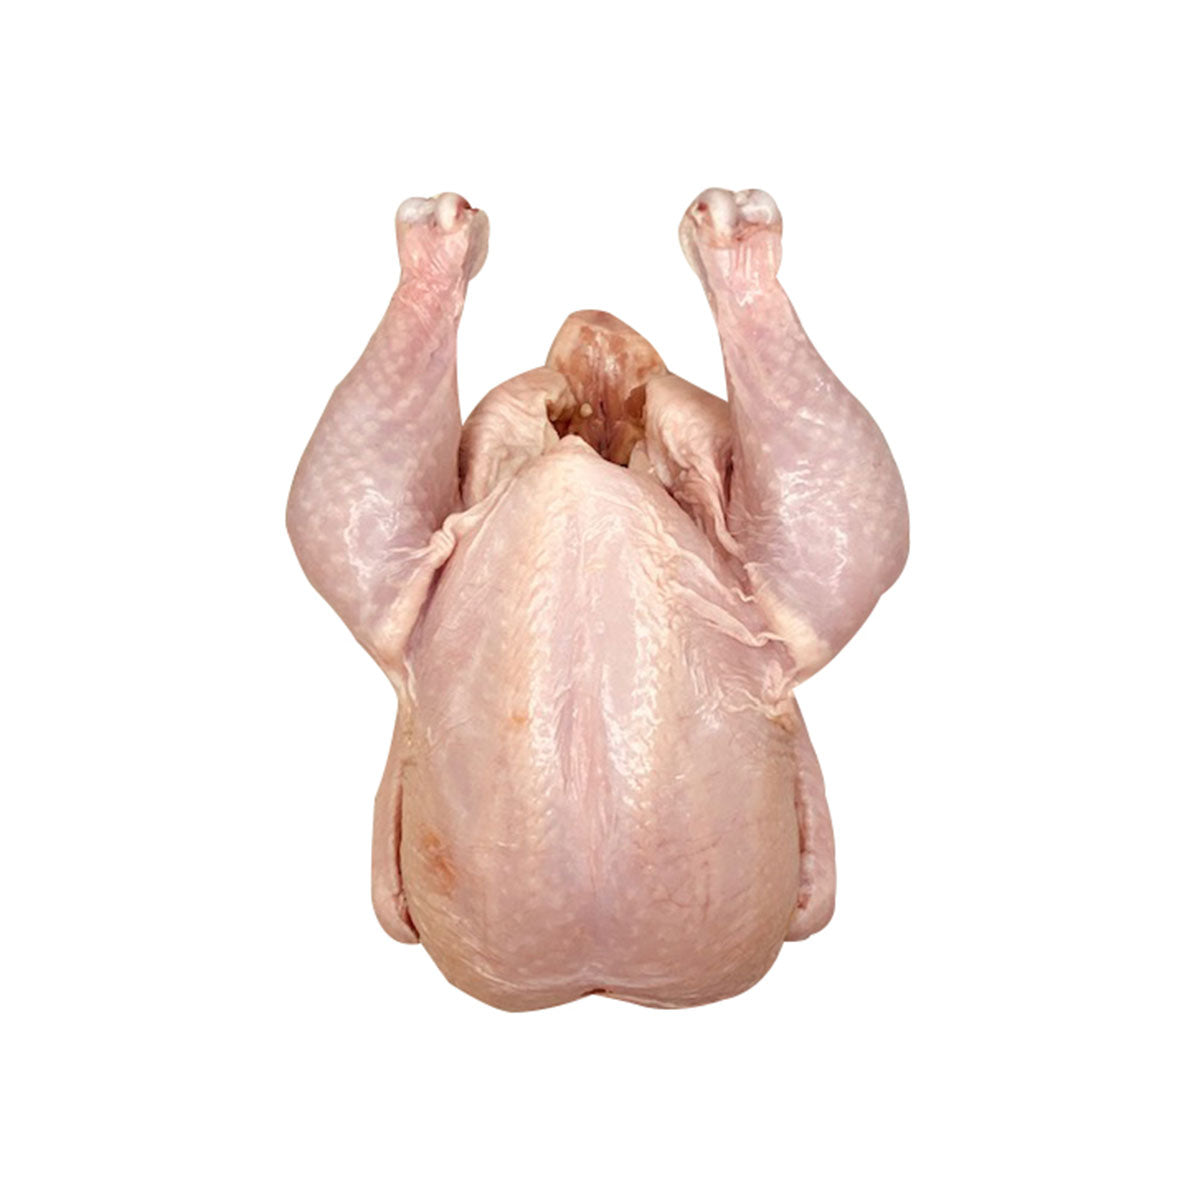 La Belle Farm Organic Air Chilled Whole Chickens Retail Ready